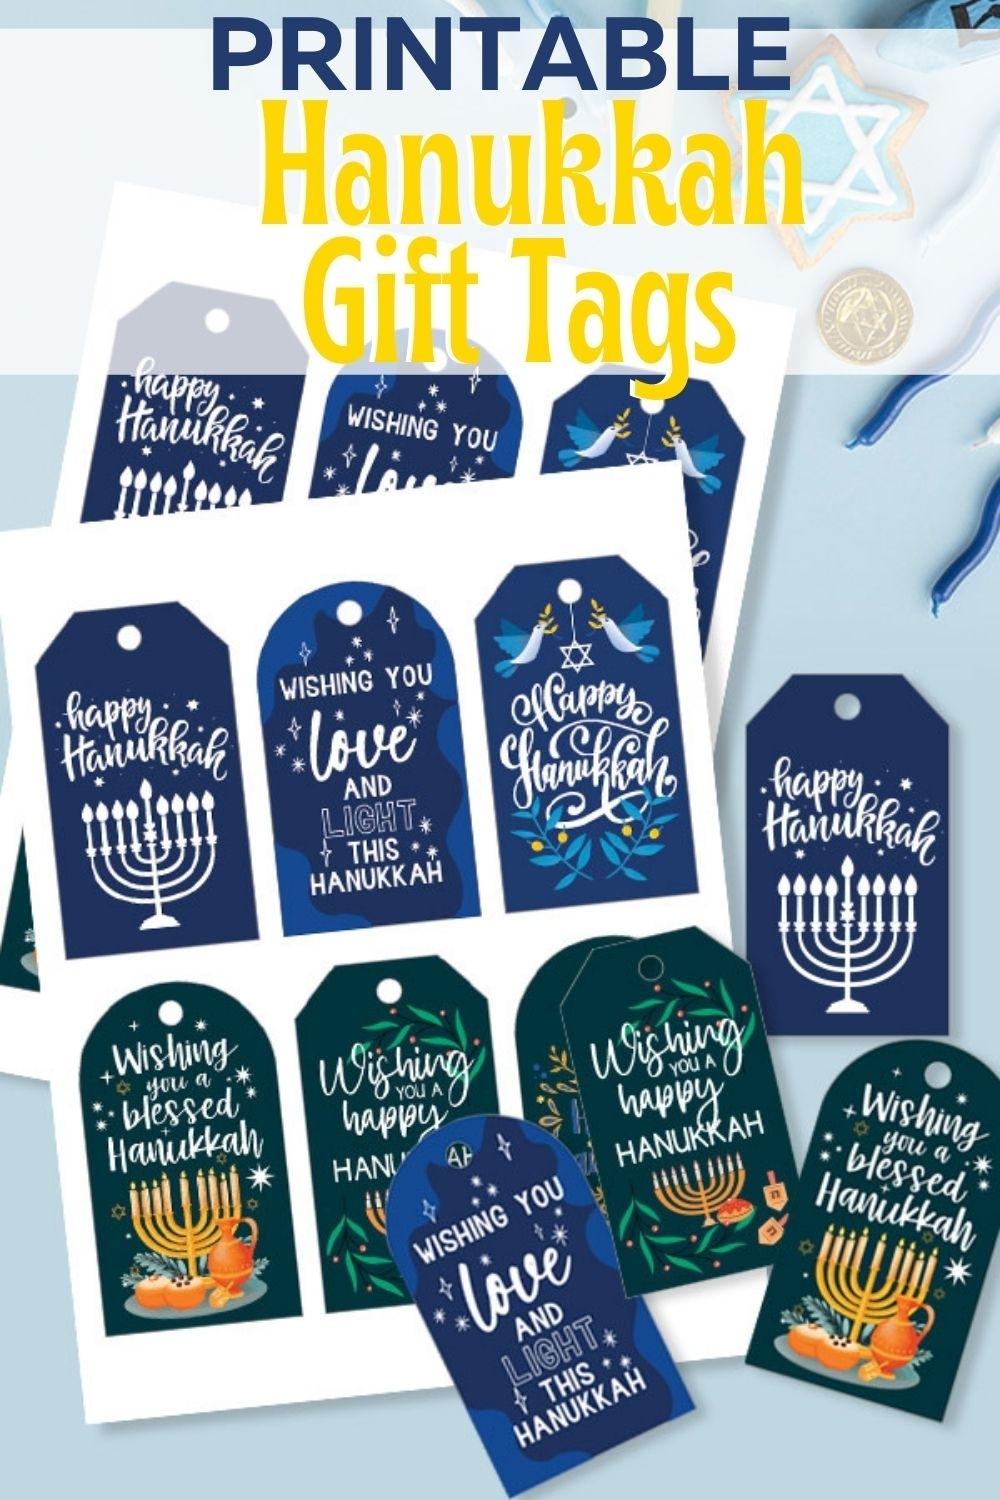 FREE Printable Hanukkah Gift Tags To Celebrate With